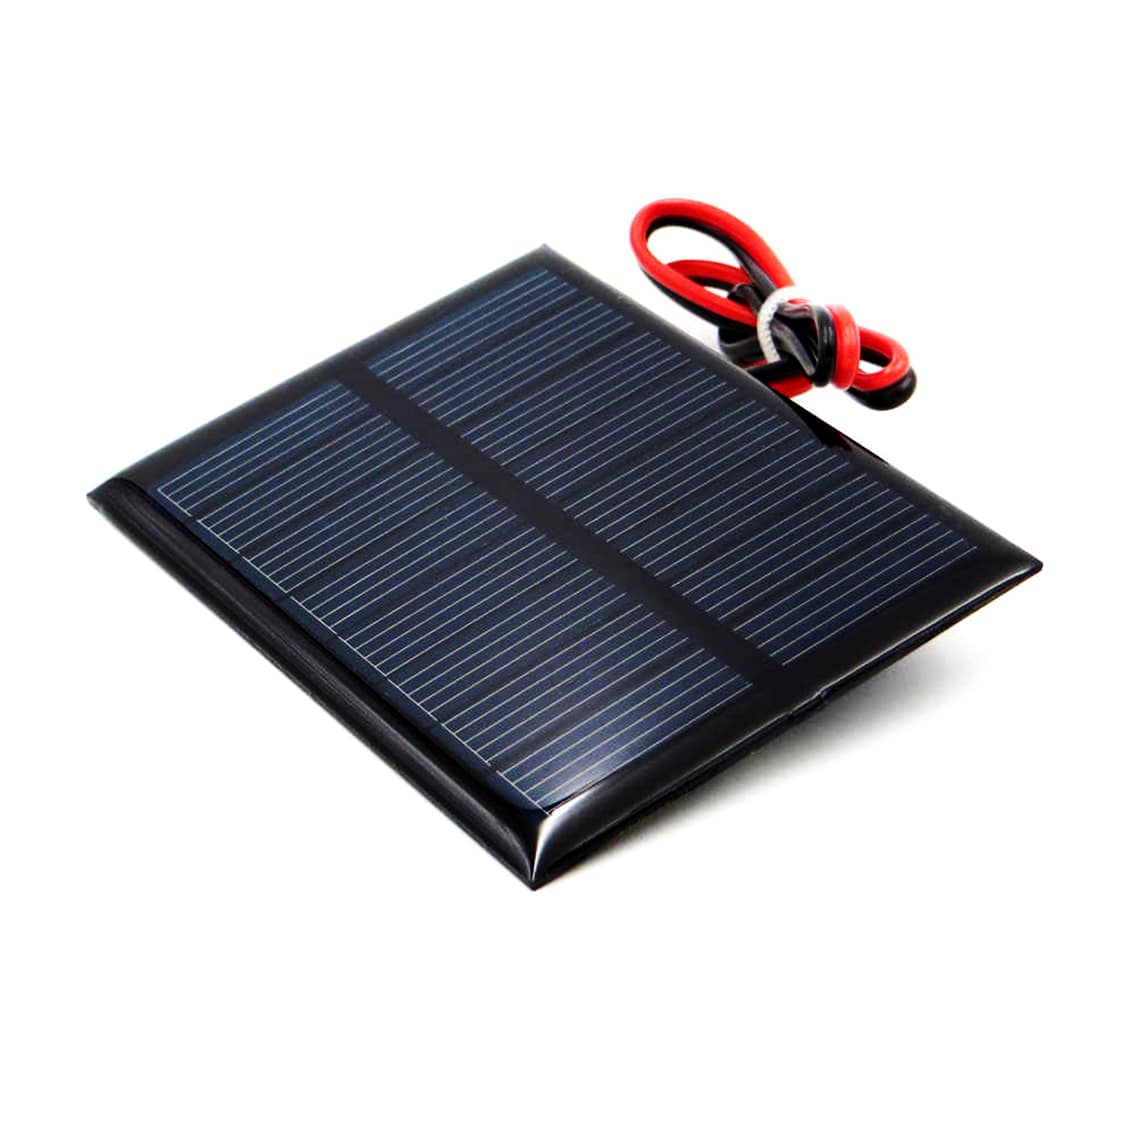 PHI1052696 – 4V 150mA Solar Panel with Cable – 60mm x 80mm 01